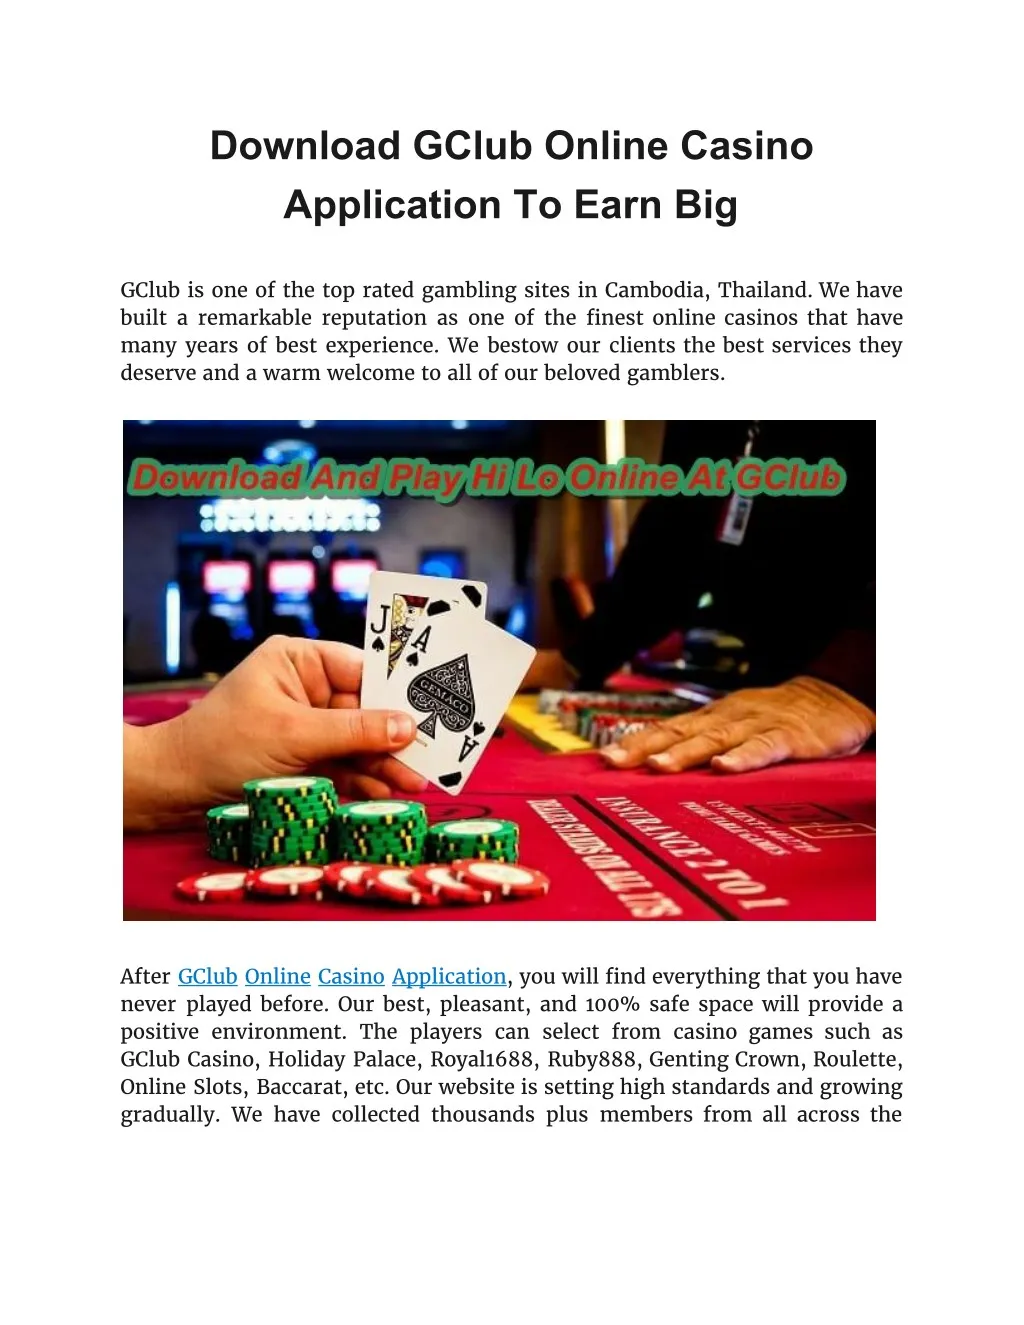 download gclub online casino application to earn